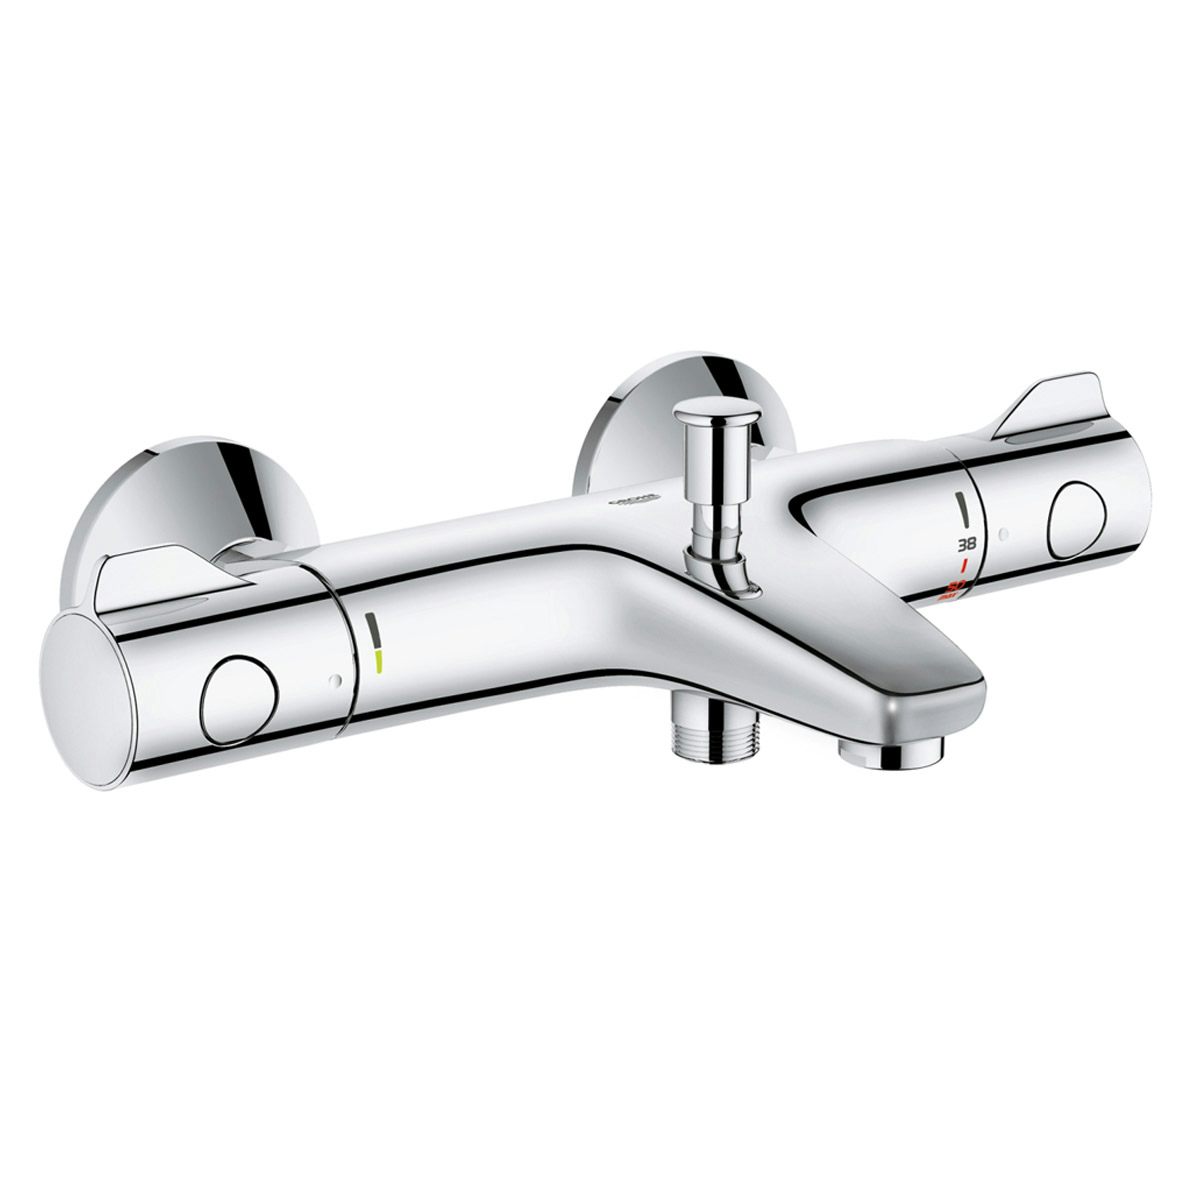 Grohe Grohtherm 800 thermostatic bath shower mixer tap